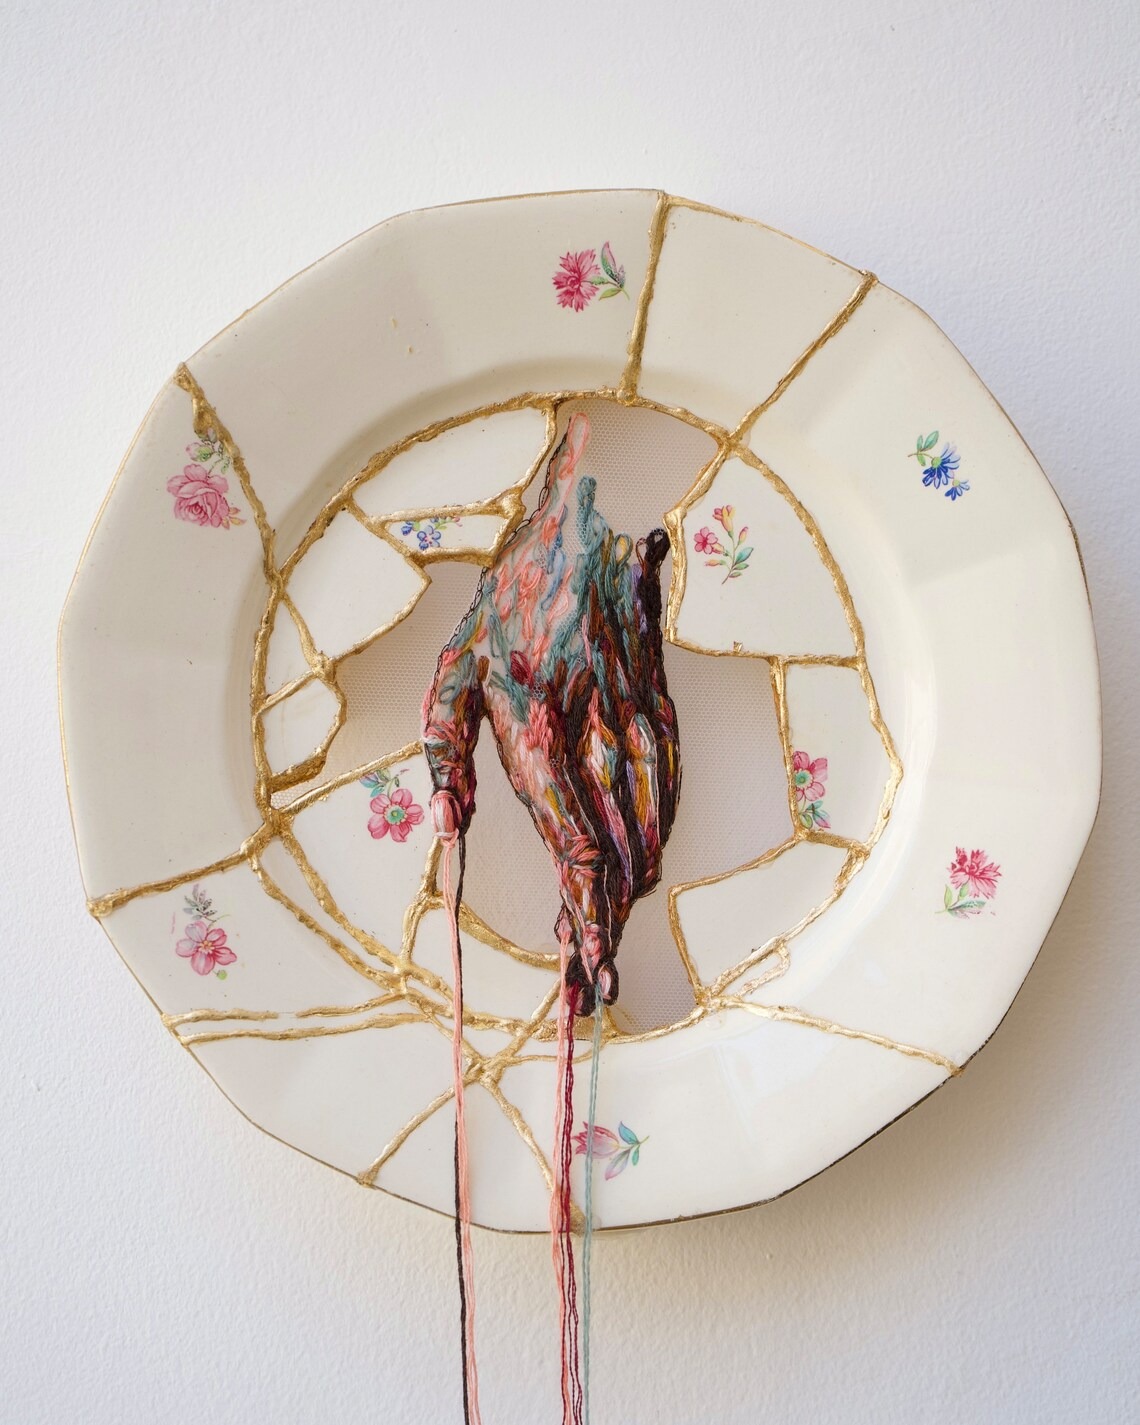 Embroidered Kintsugi, Delicate And Meaningful Mixed Media Artworks By Kathrin Marchenko (7)